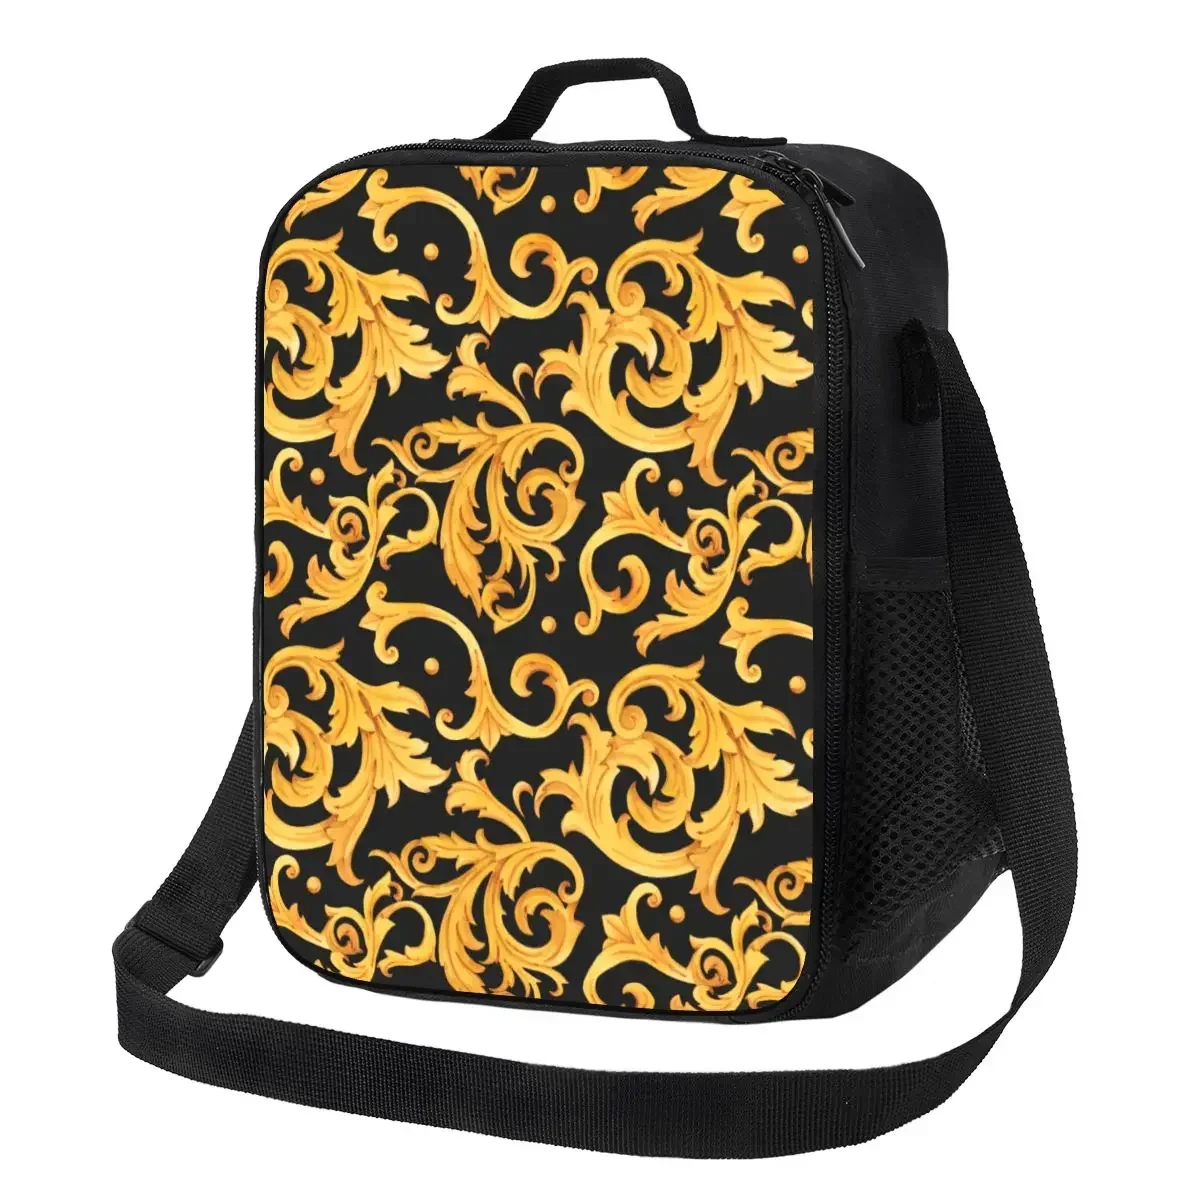 

Luxury Golden European Floral Insulated Lunch Bag for School Office Baroque Victorian Art Cooler Thermal Bento Box Children